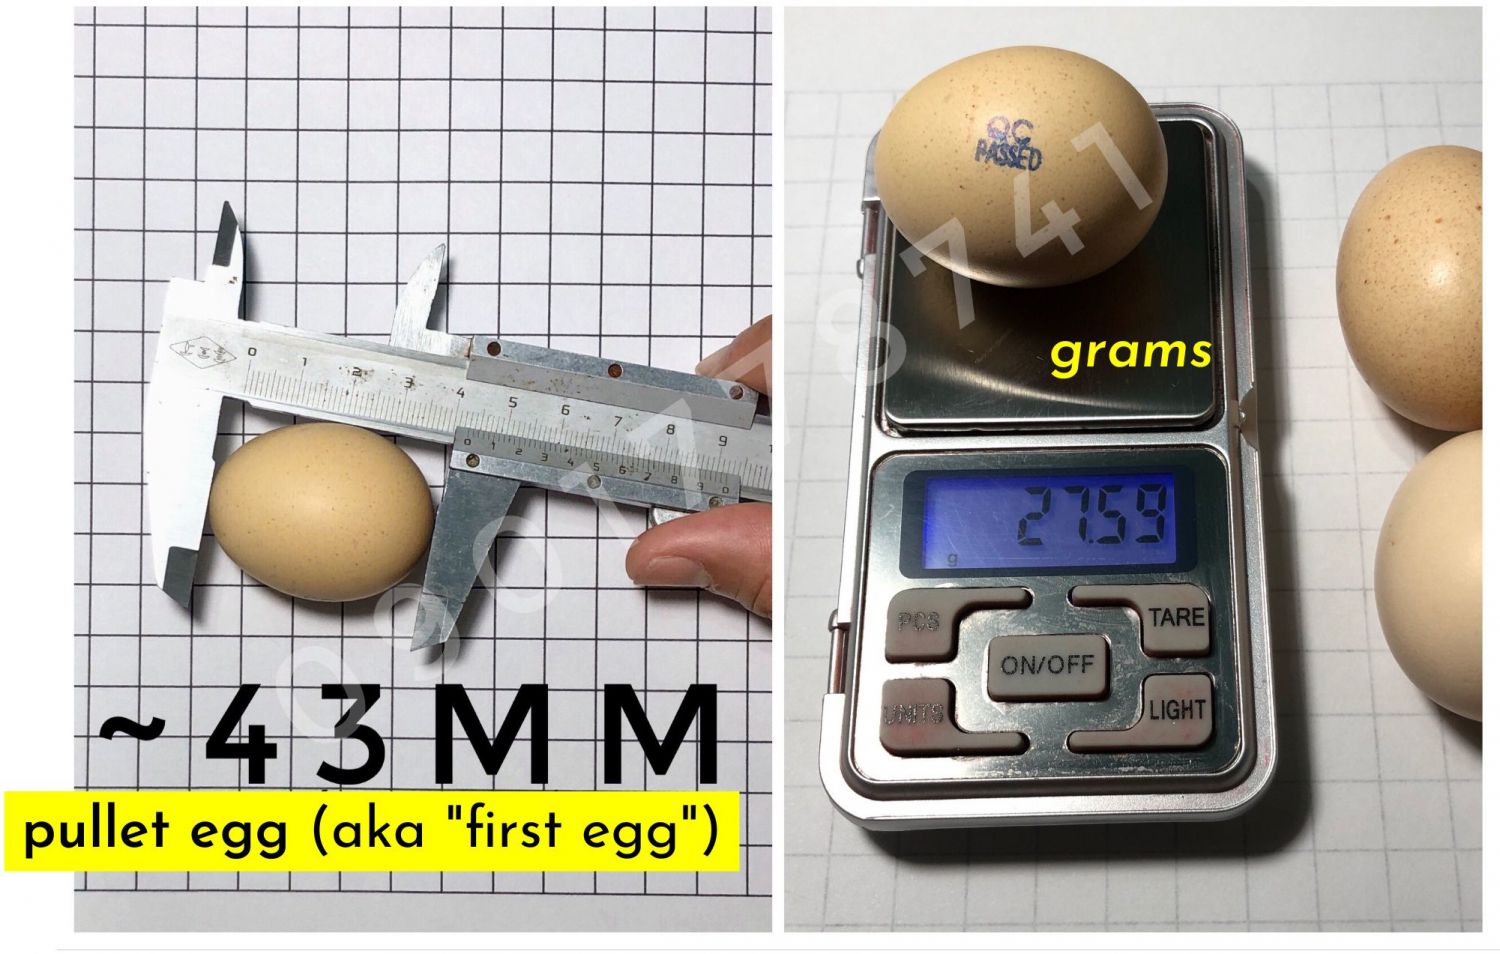 Average size of pullet silkie eggs (aka first eggs)